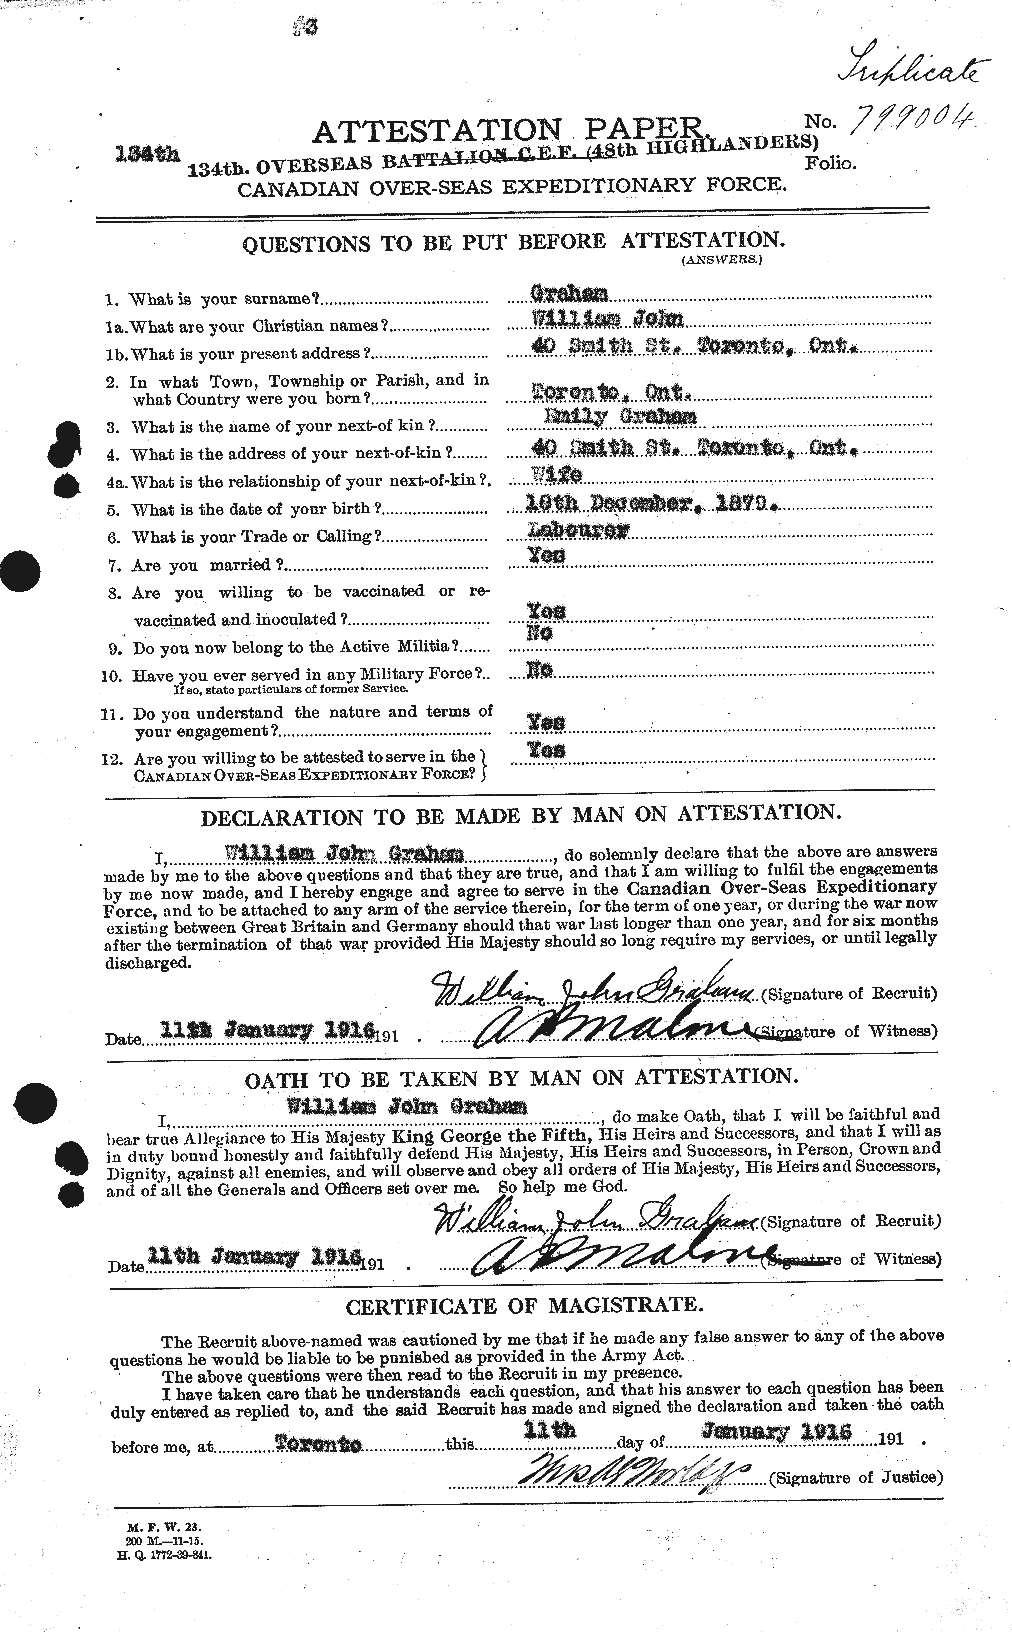 Personnel Records of the First World War - CEF 358011a